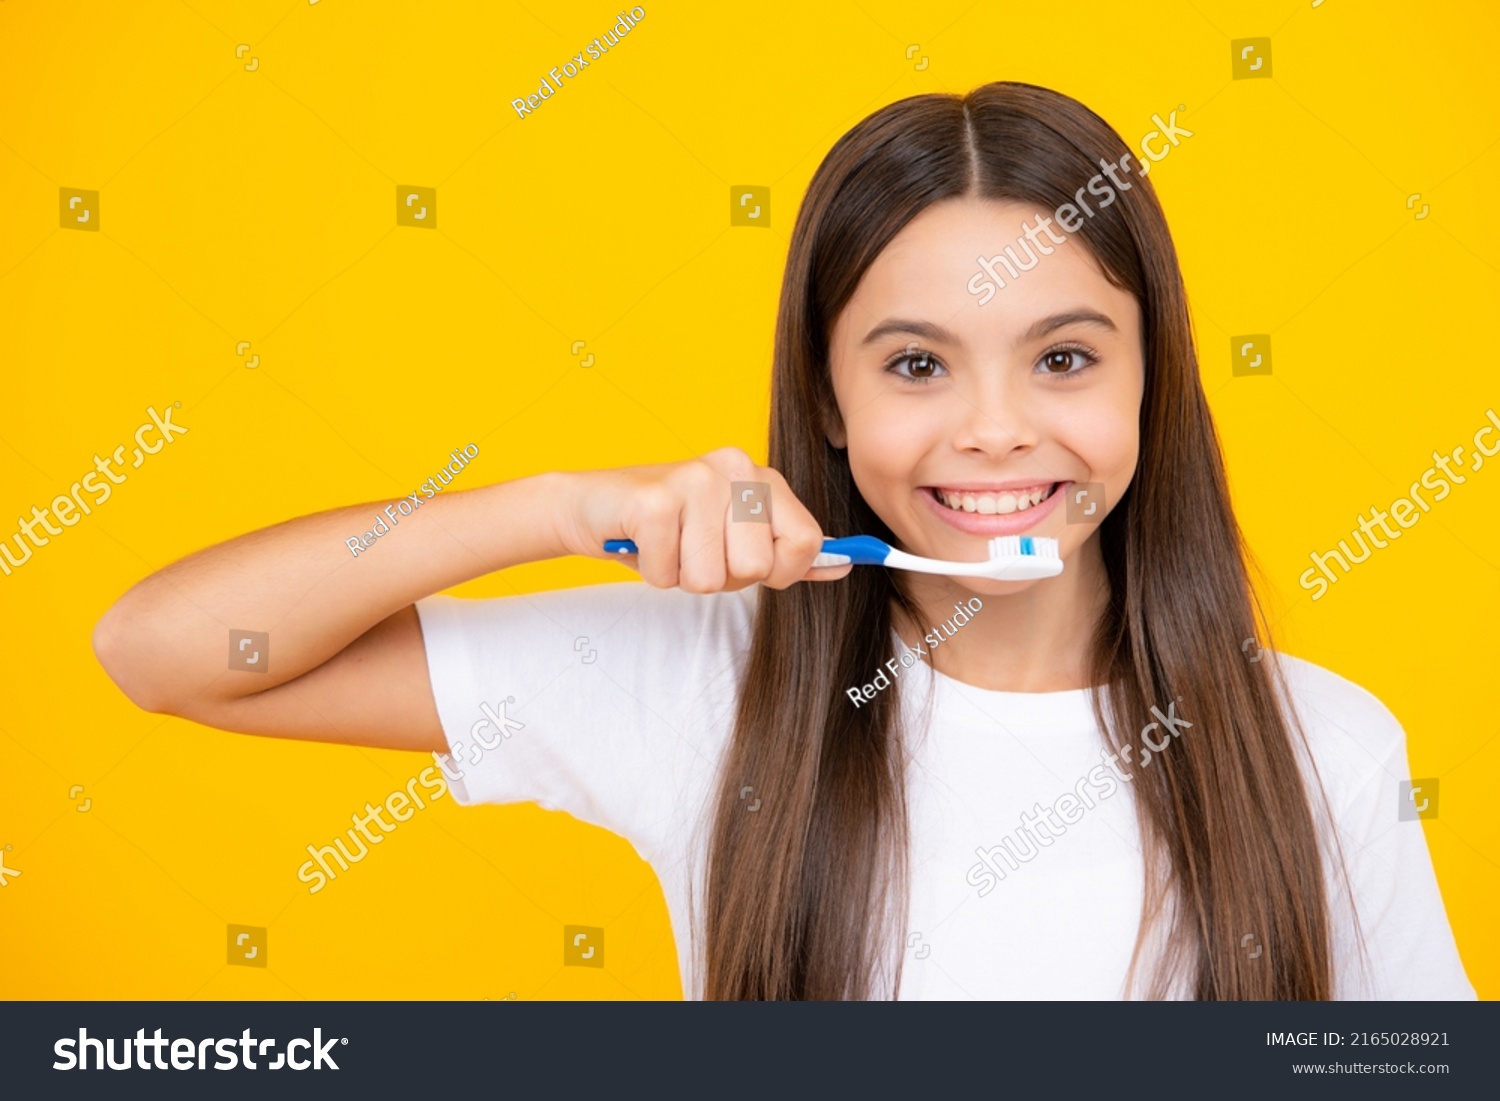 Happy teenager portrait. Teenager girl brushing her teeth over isolated yellow background. Daily hygiene teen child hold toothbrush, morning routine. Dental health oral care. Smiling girl. #2165028921